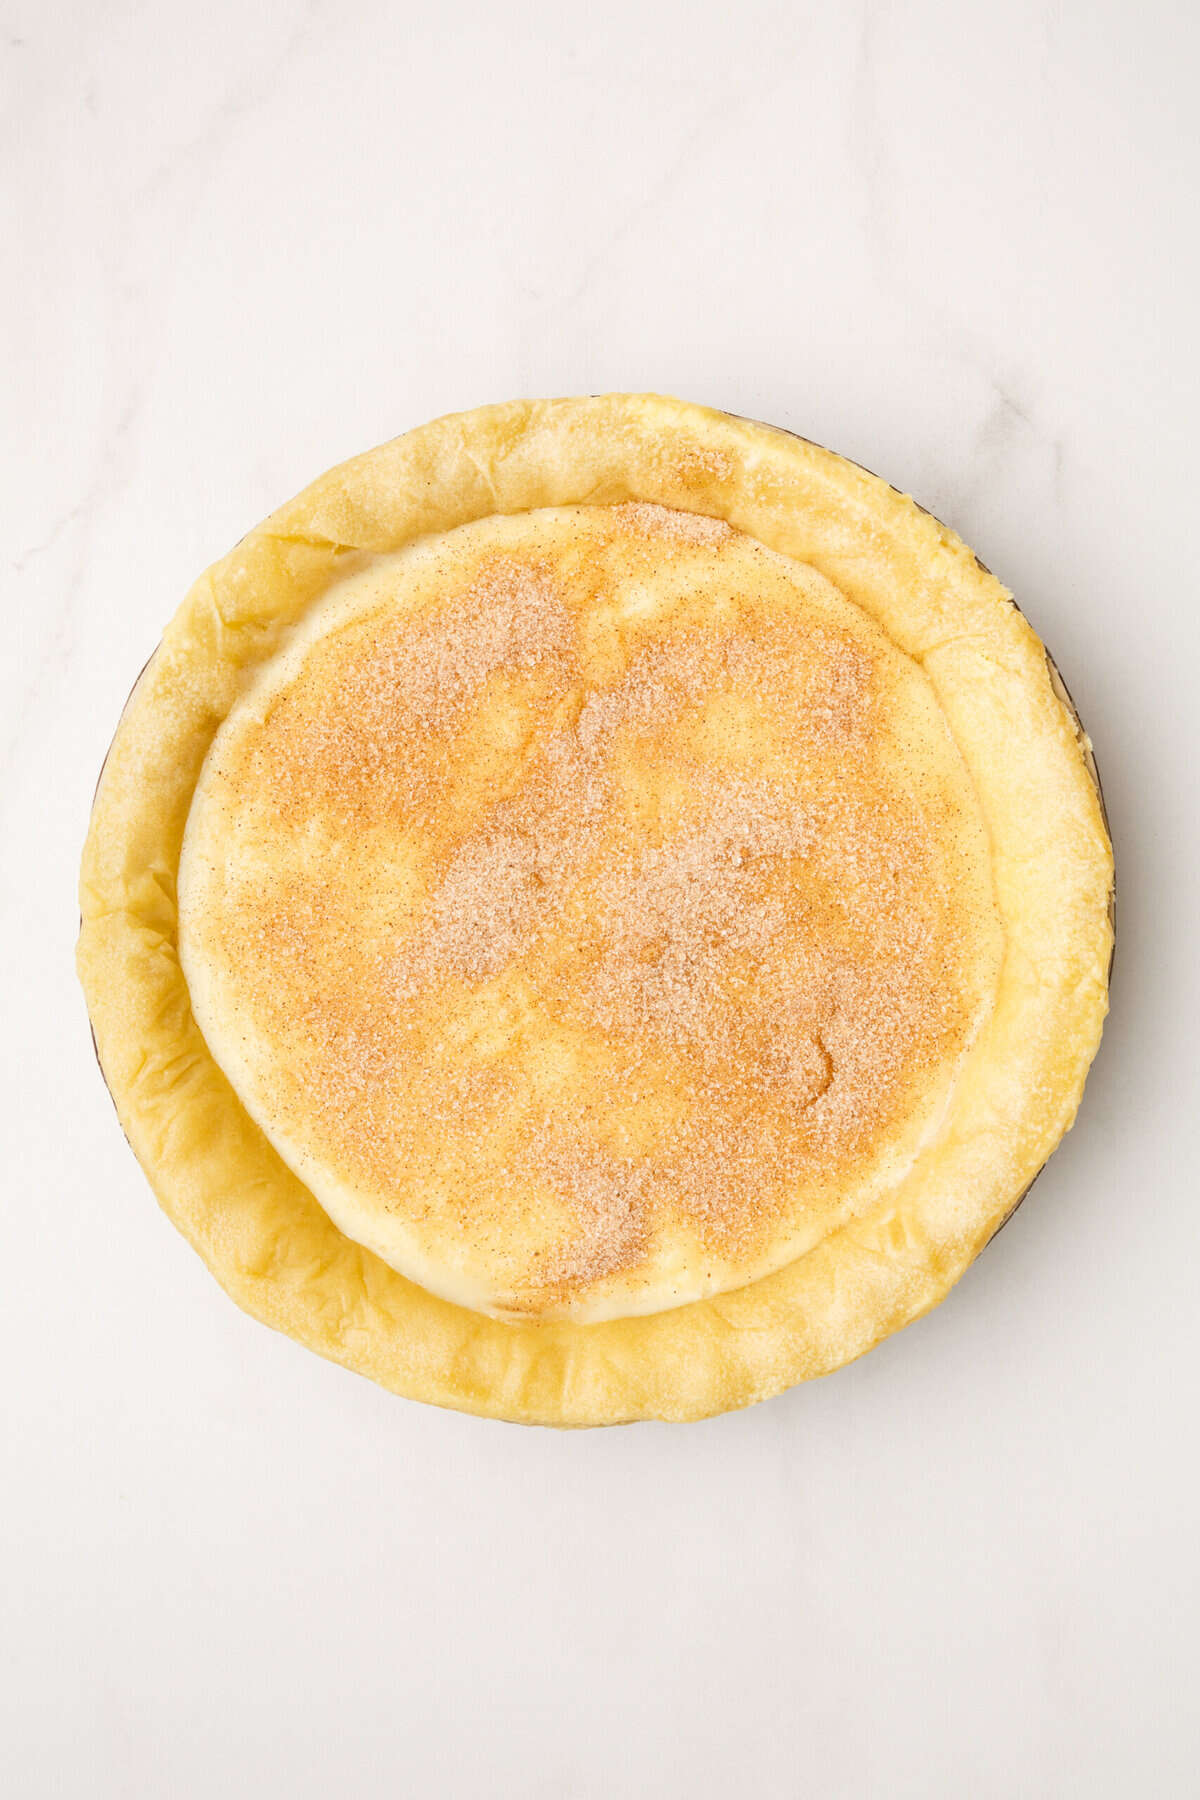 par baked pie crust with amish sugar cream pie filling topped with brown sugar and cinnamon.